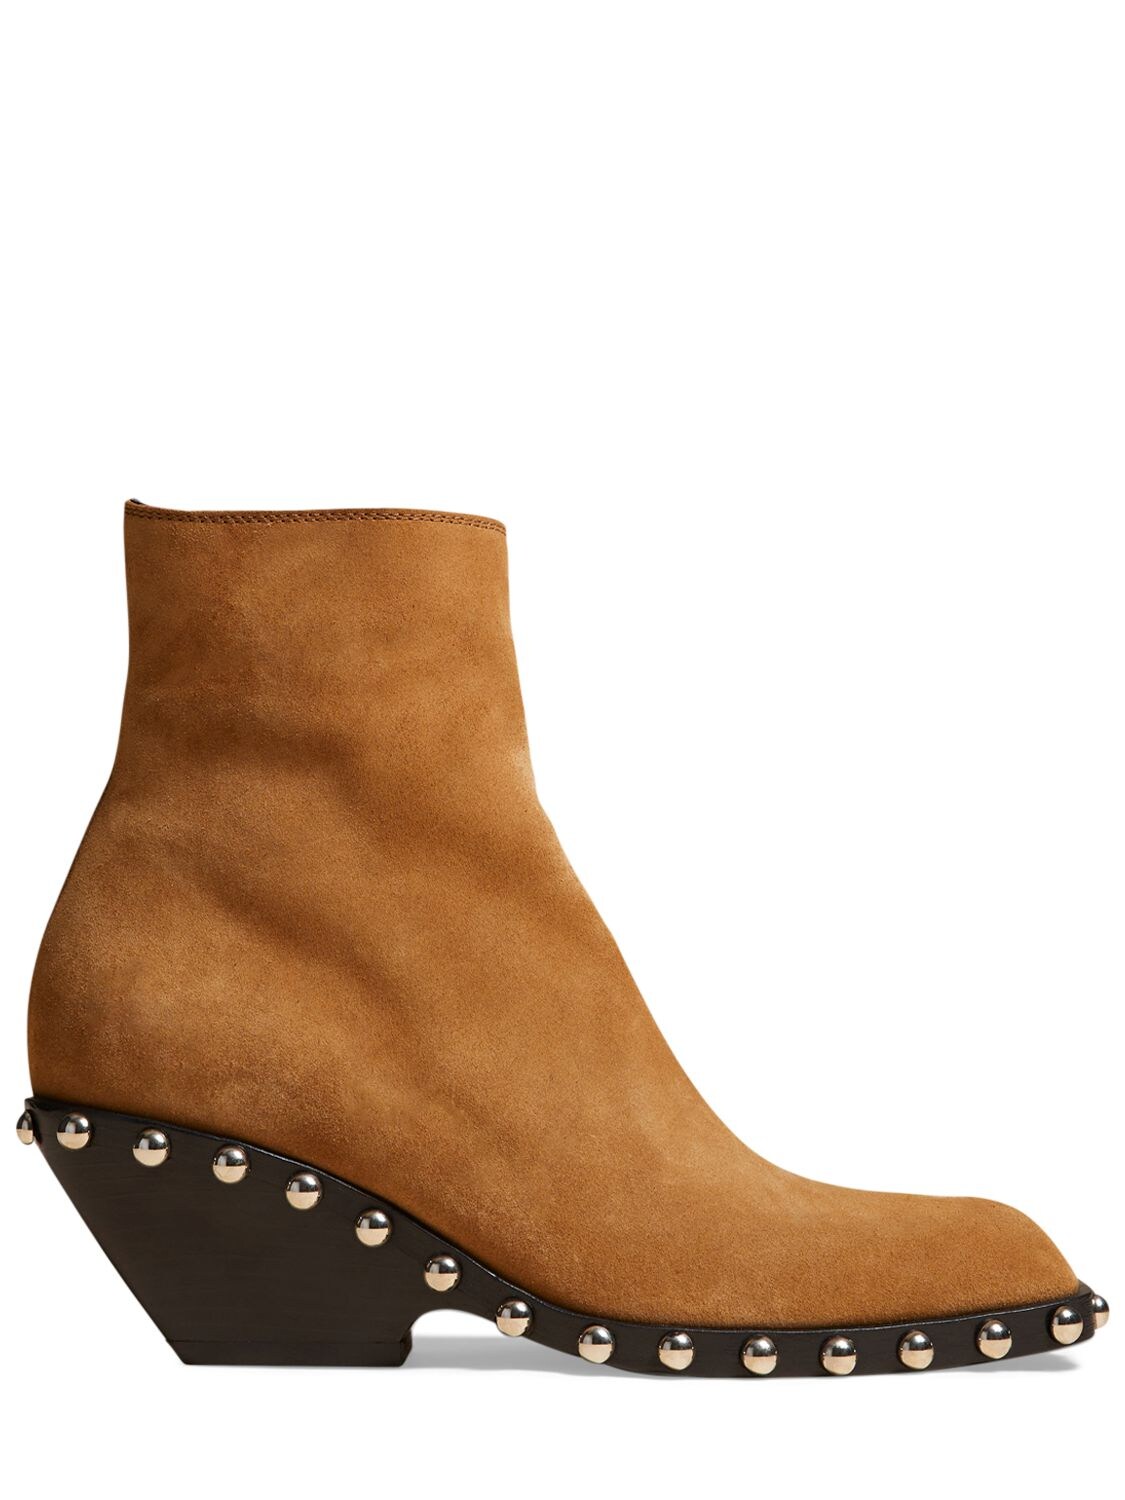 KHAITE 55mm Hooper Suede Ankle Boots